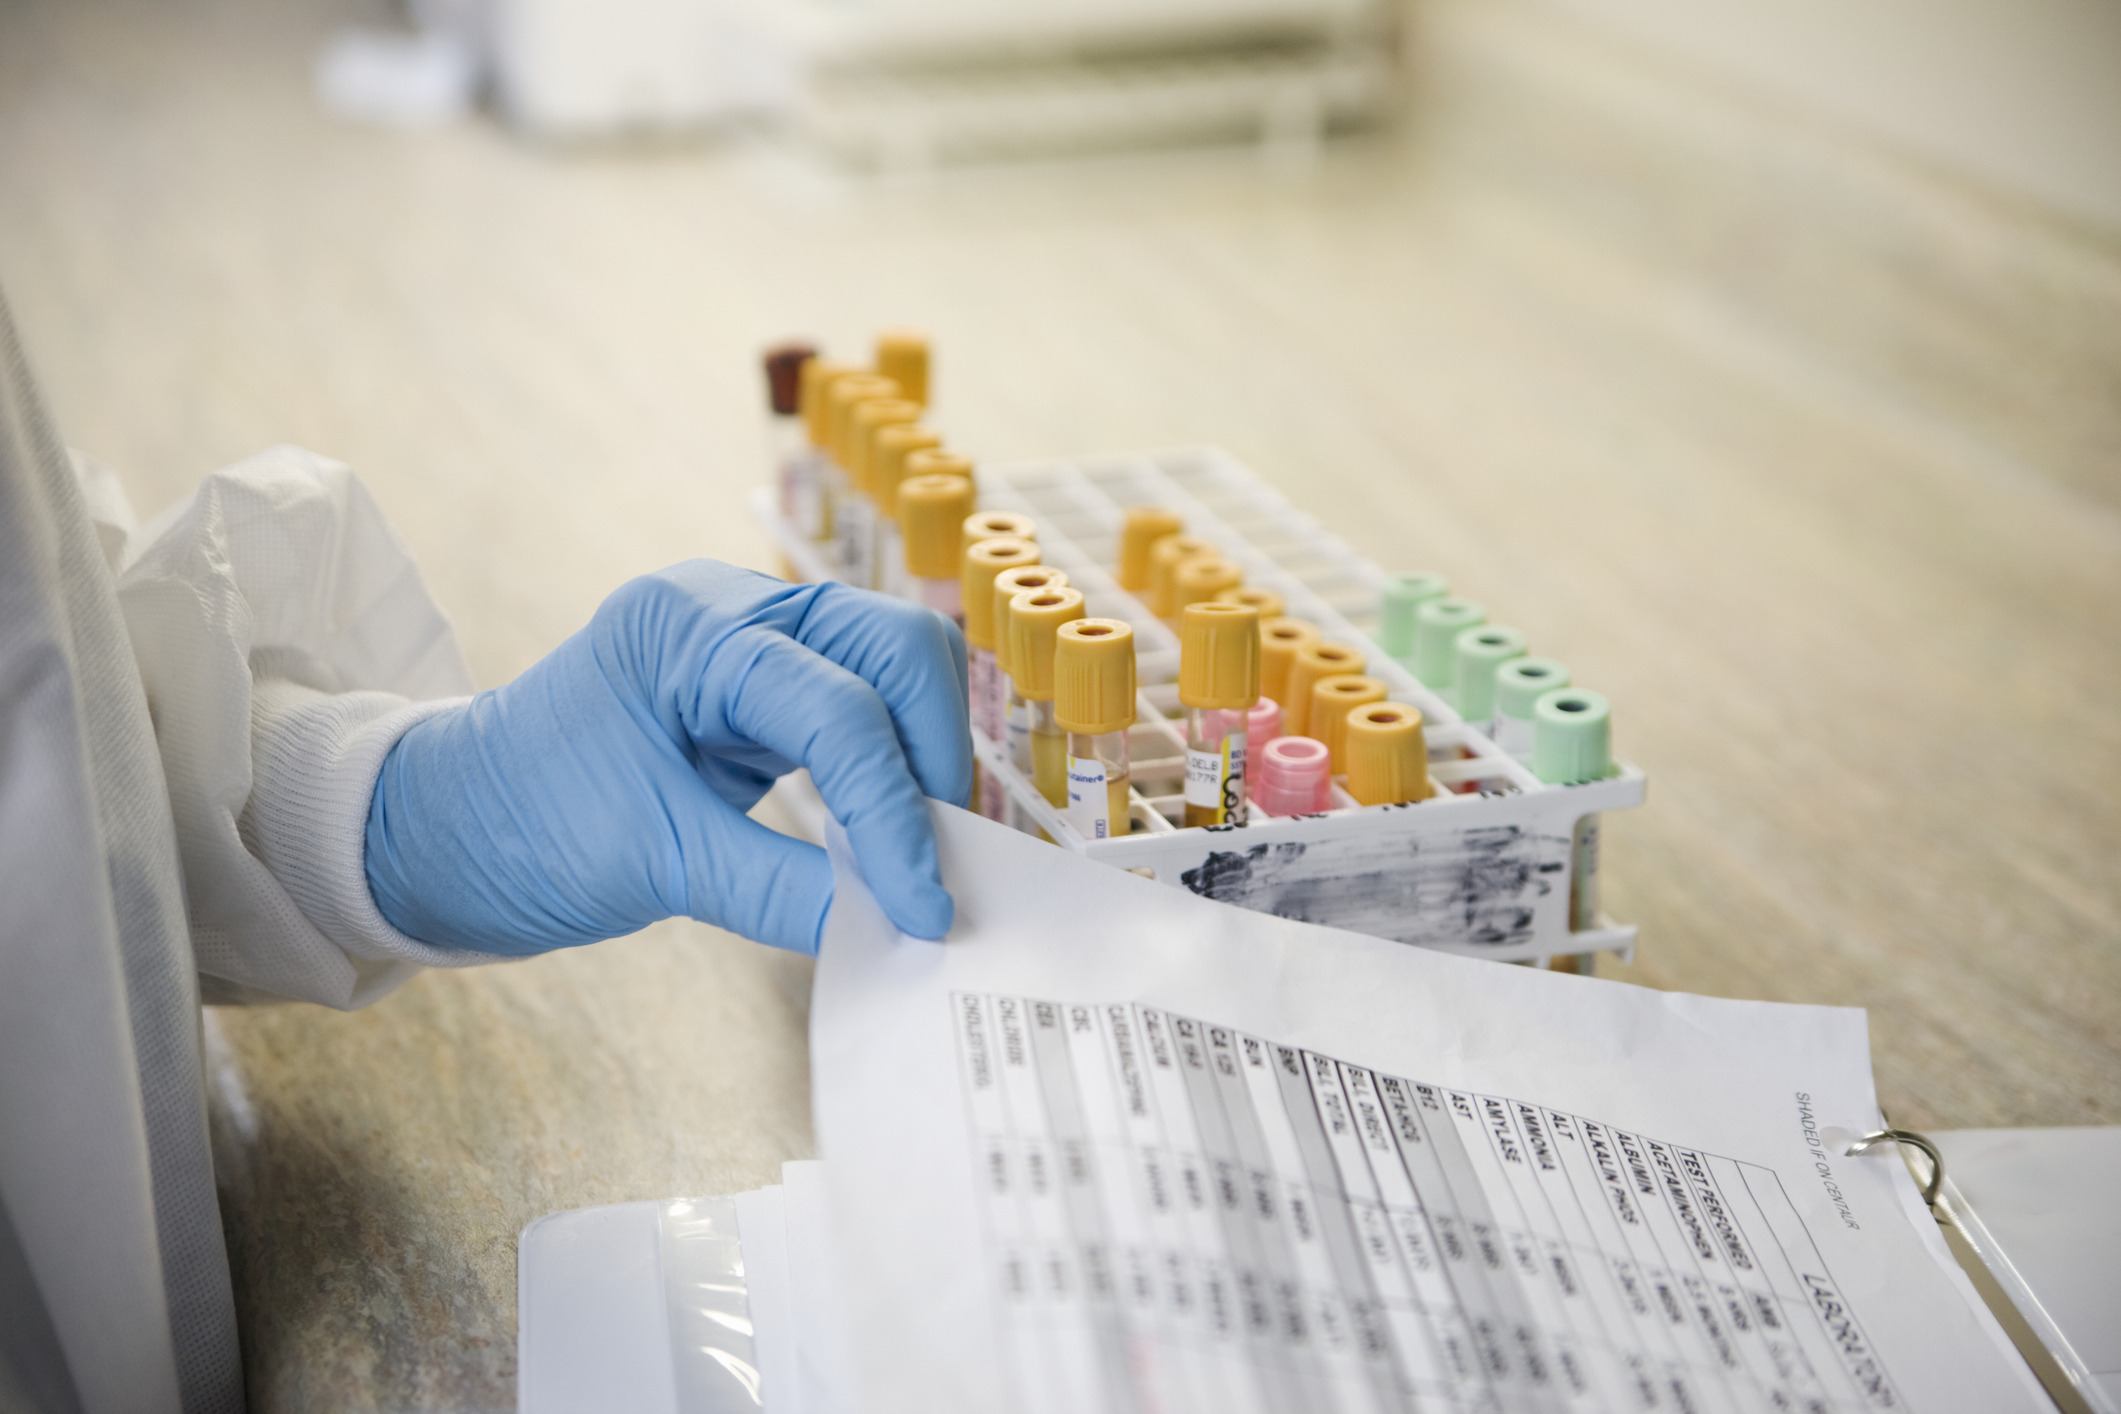 A medical professional&#x27;s gloved hand retrieving a sheet next to a rack of labeled test tubes